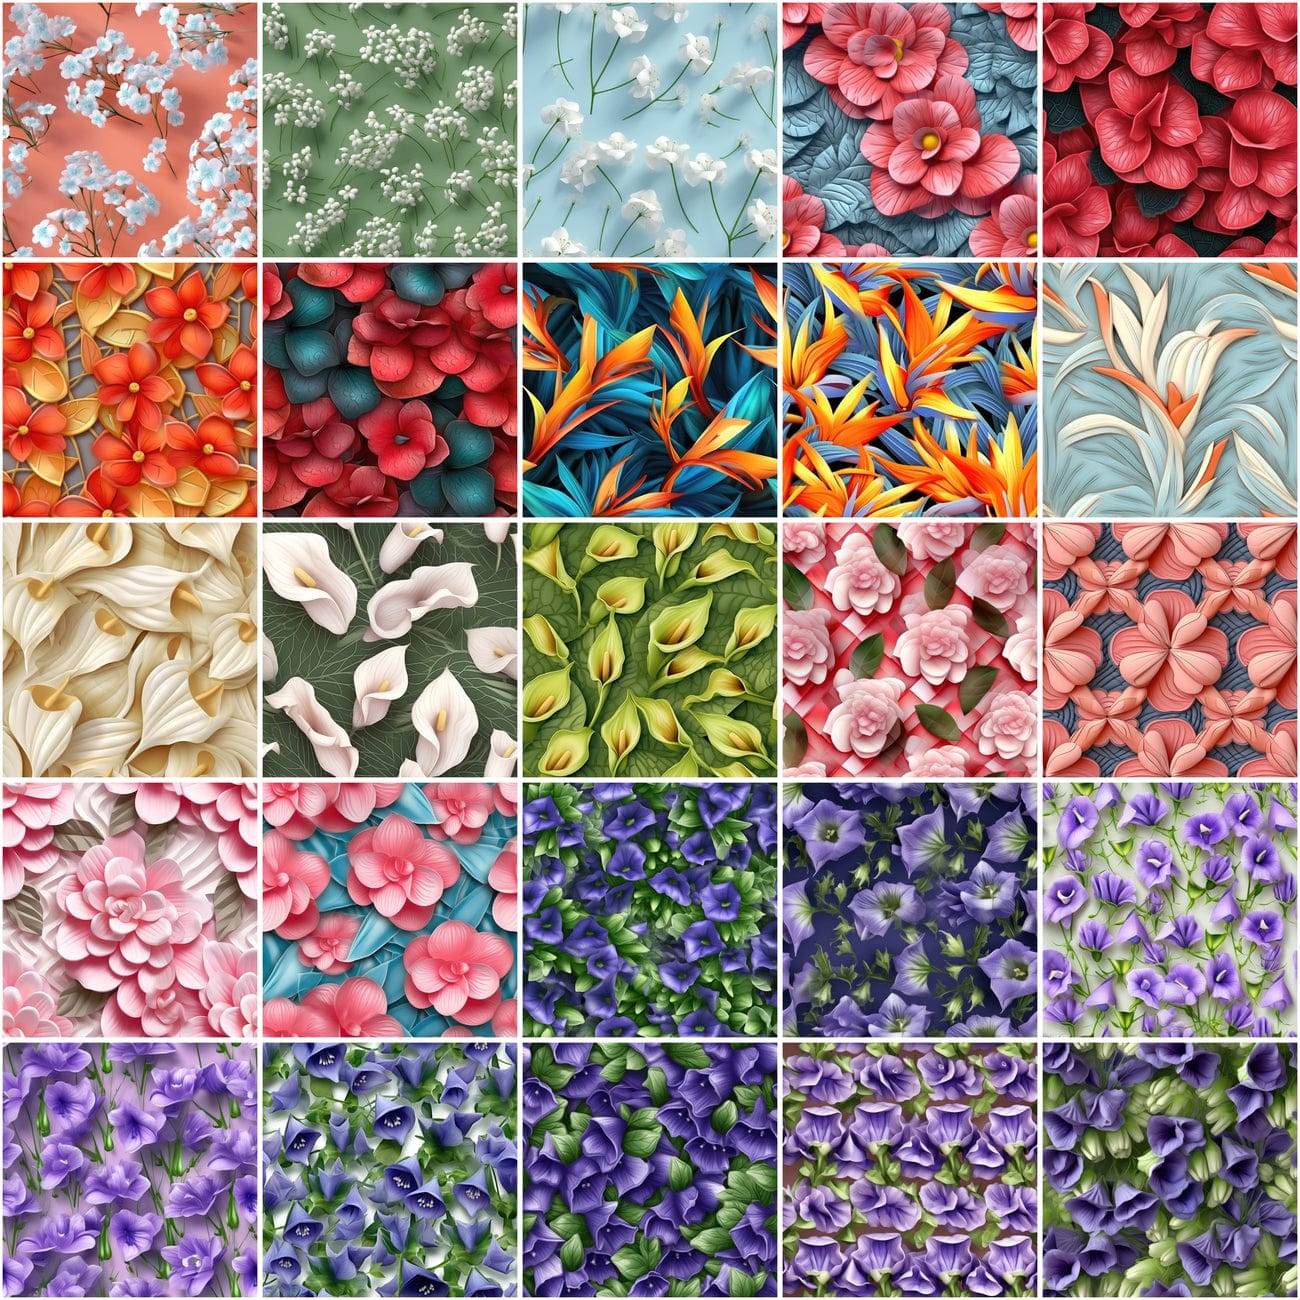 Seamless Floral Backgrounds: 180 High-Quality PNG Images for Commercial Use Digital Download Sumobundle